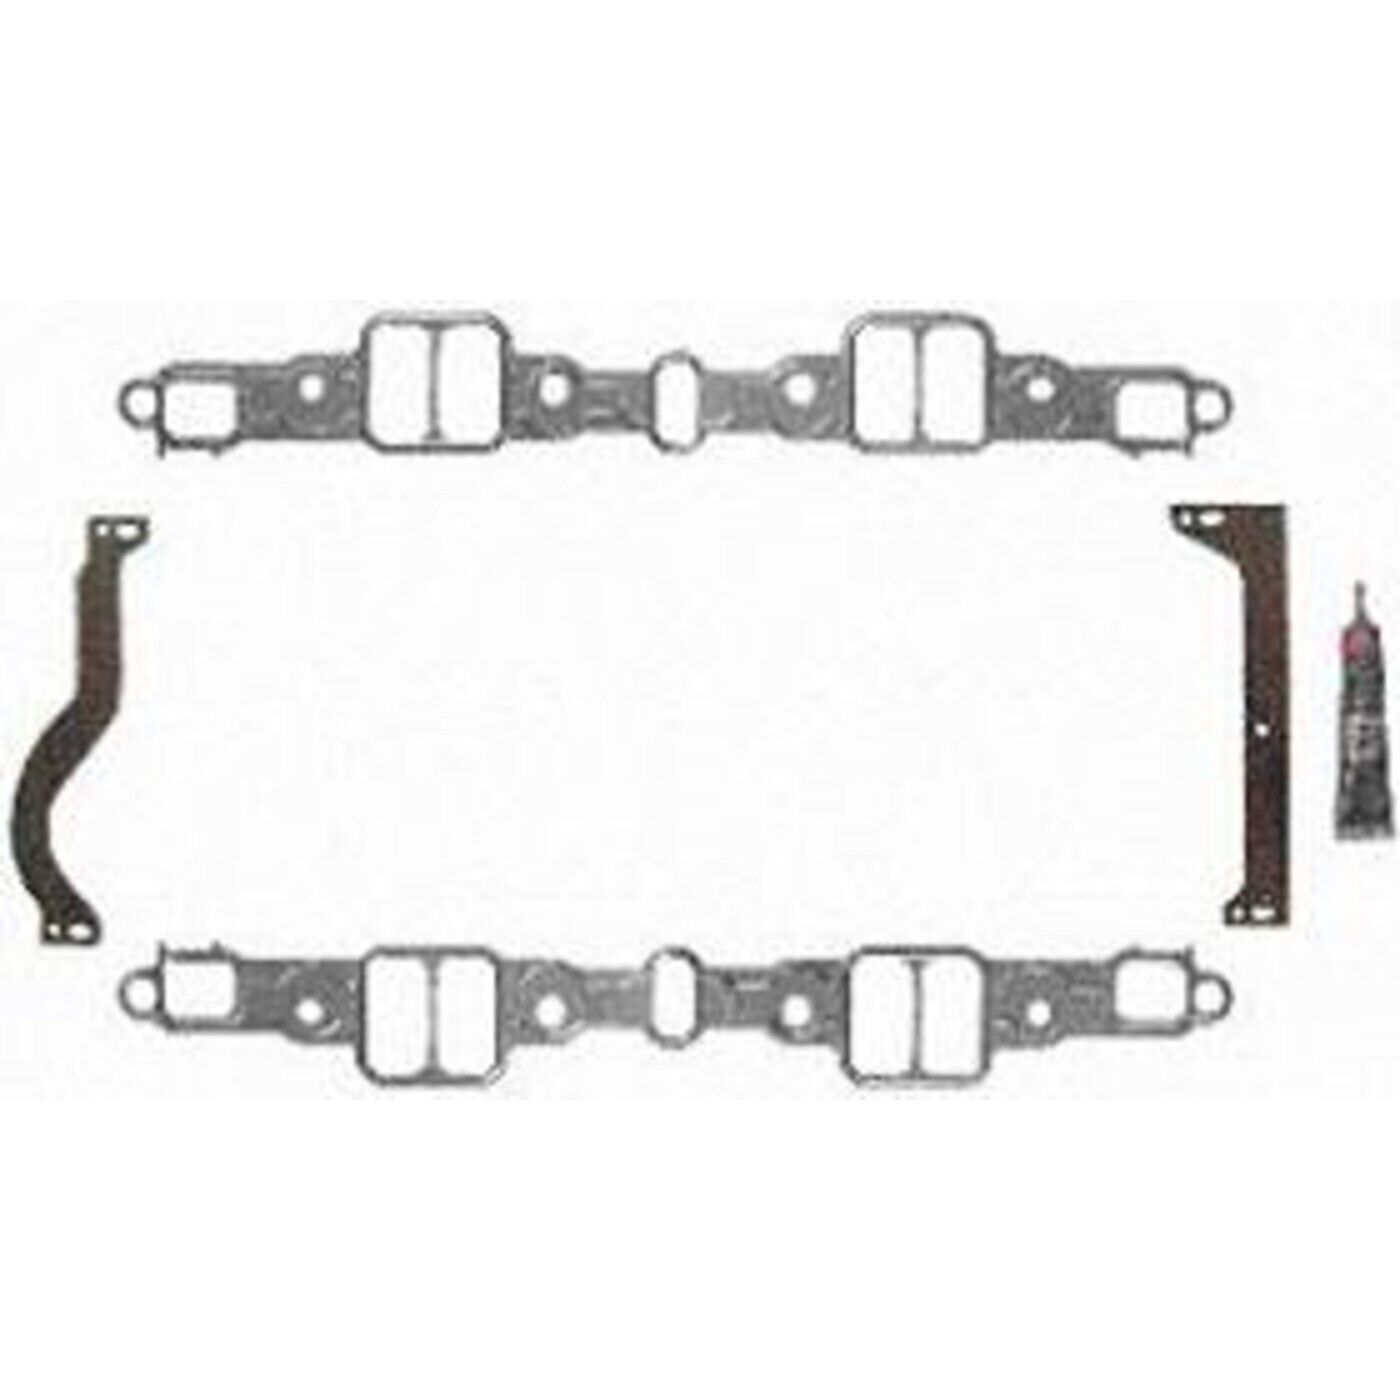 Felpro MS 90009 Intake Manifold Gaskets Set for Le Baron Town and Country Truck